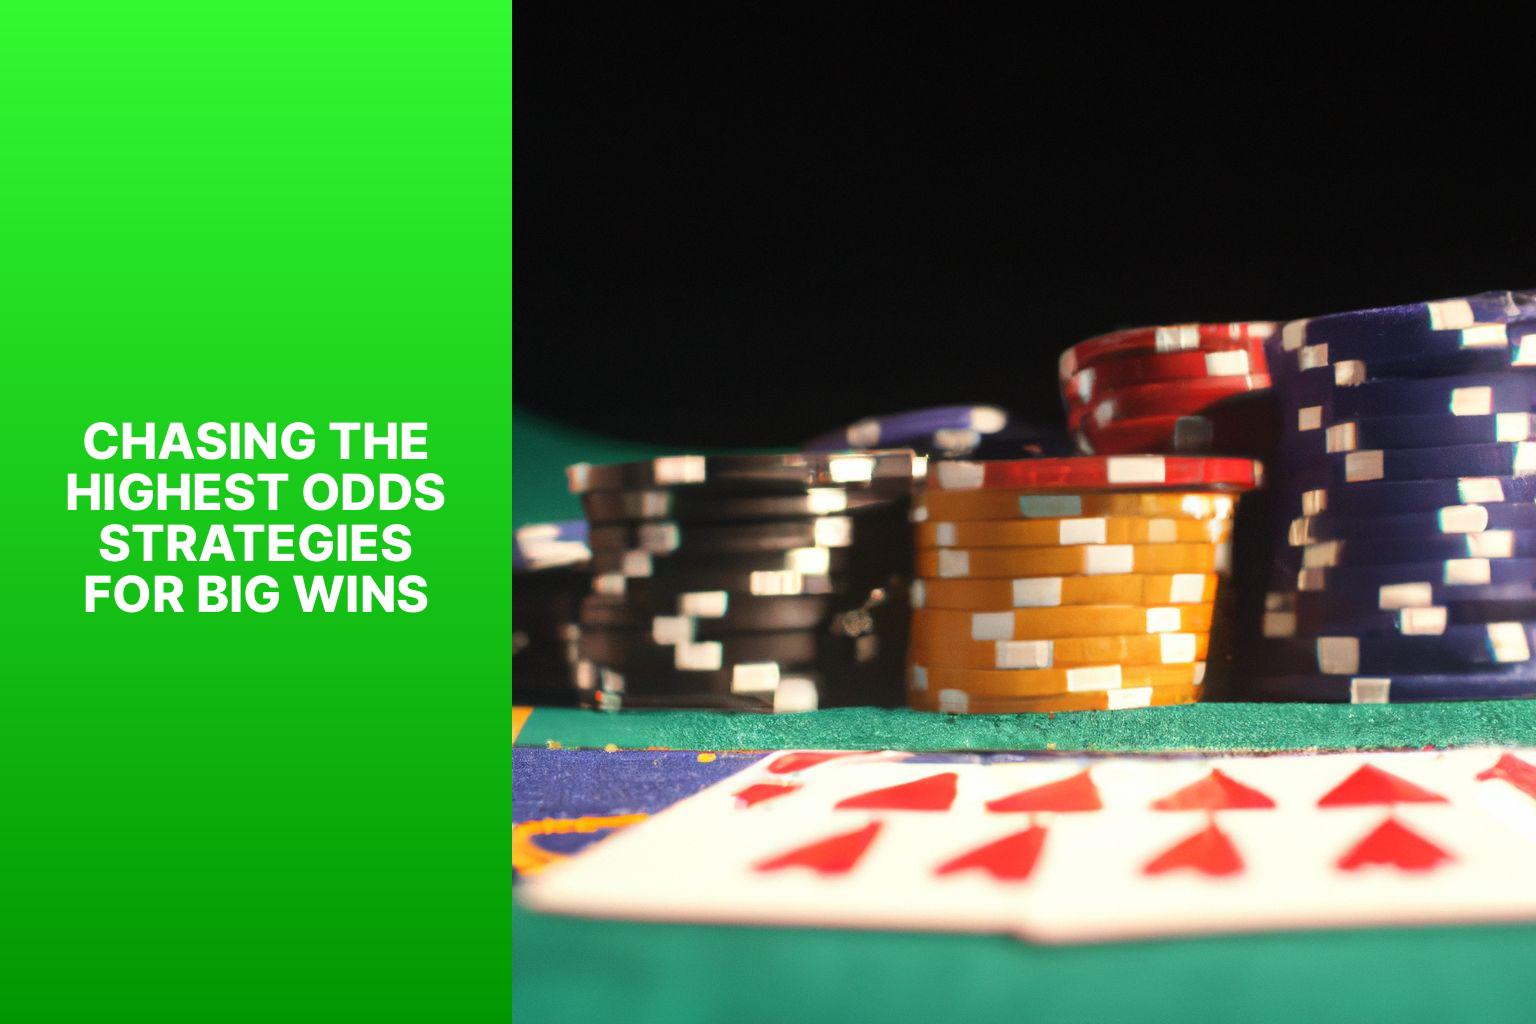 Chasing the Highest Odds Strategies for Big Wins